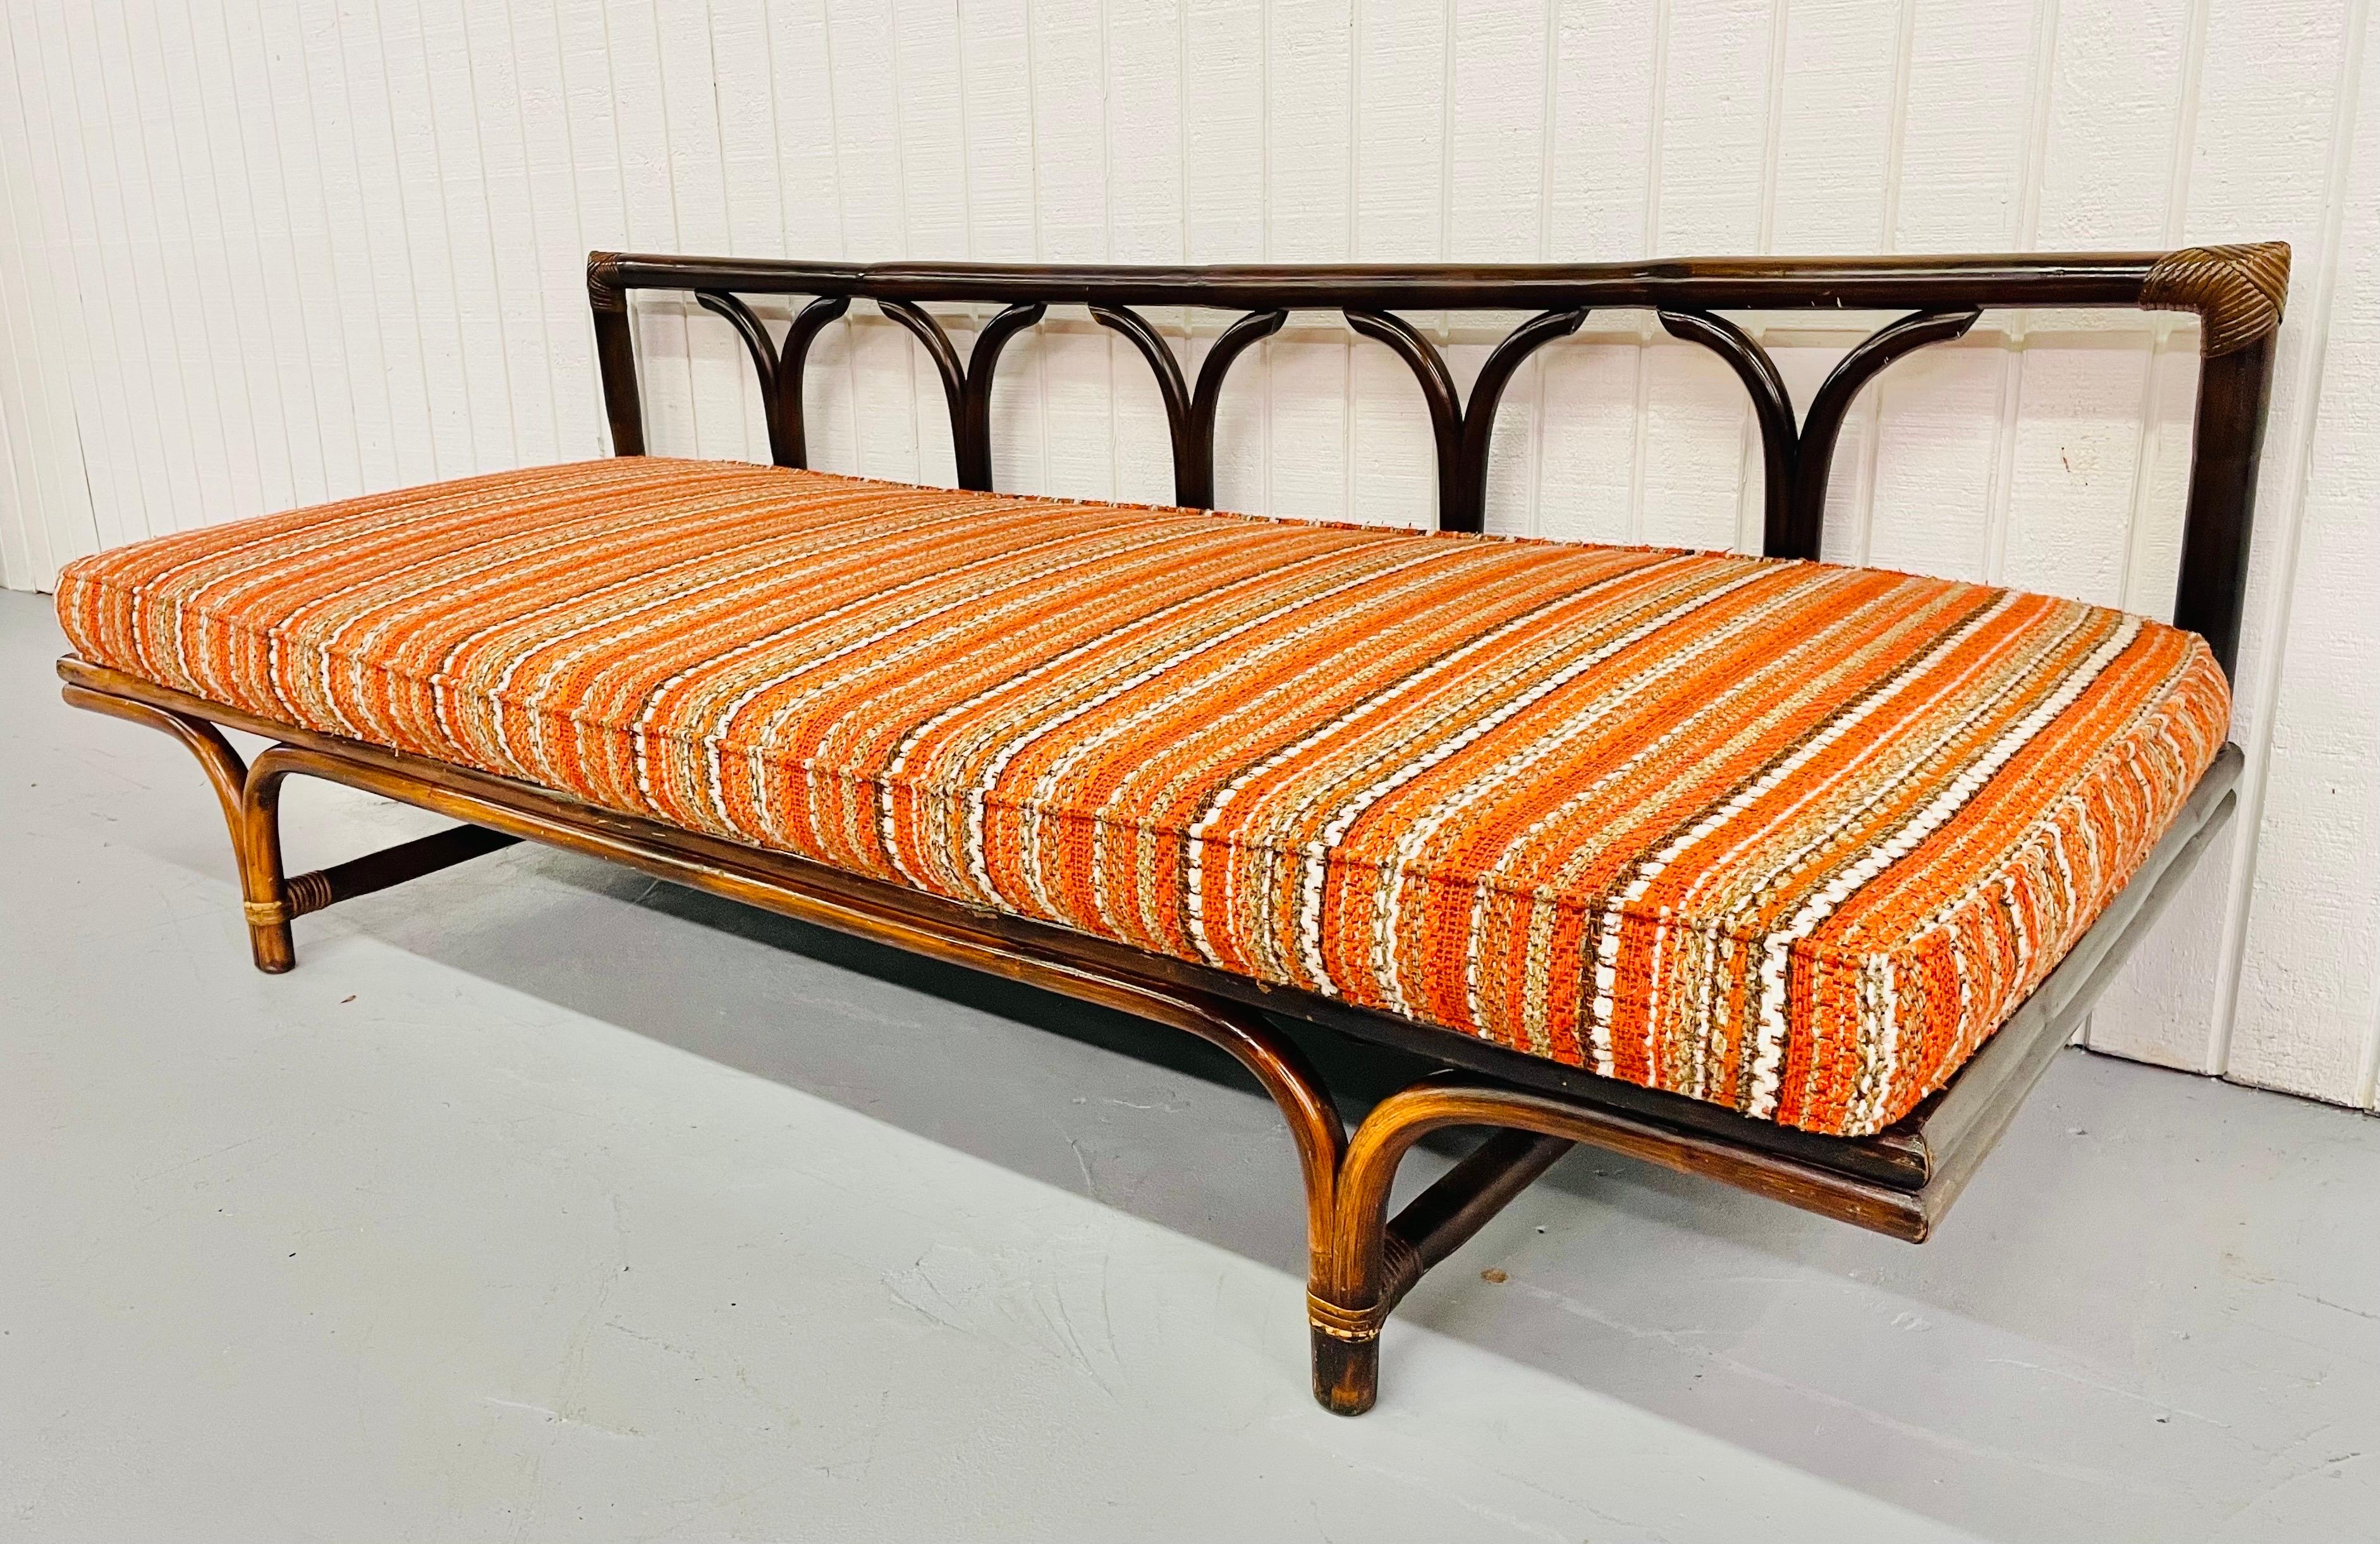 This is an exceptional rare mid-century rattan day bed. With the original orange cushion in excellent condition. A true statement piece!